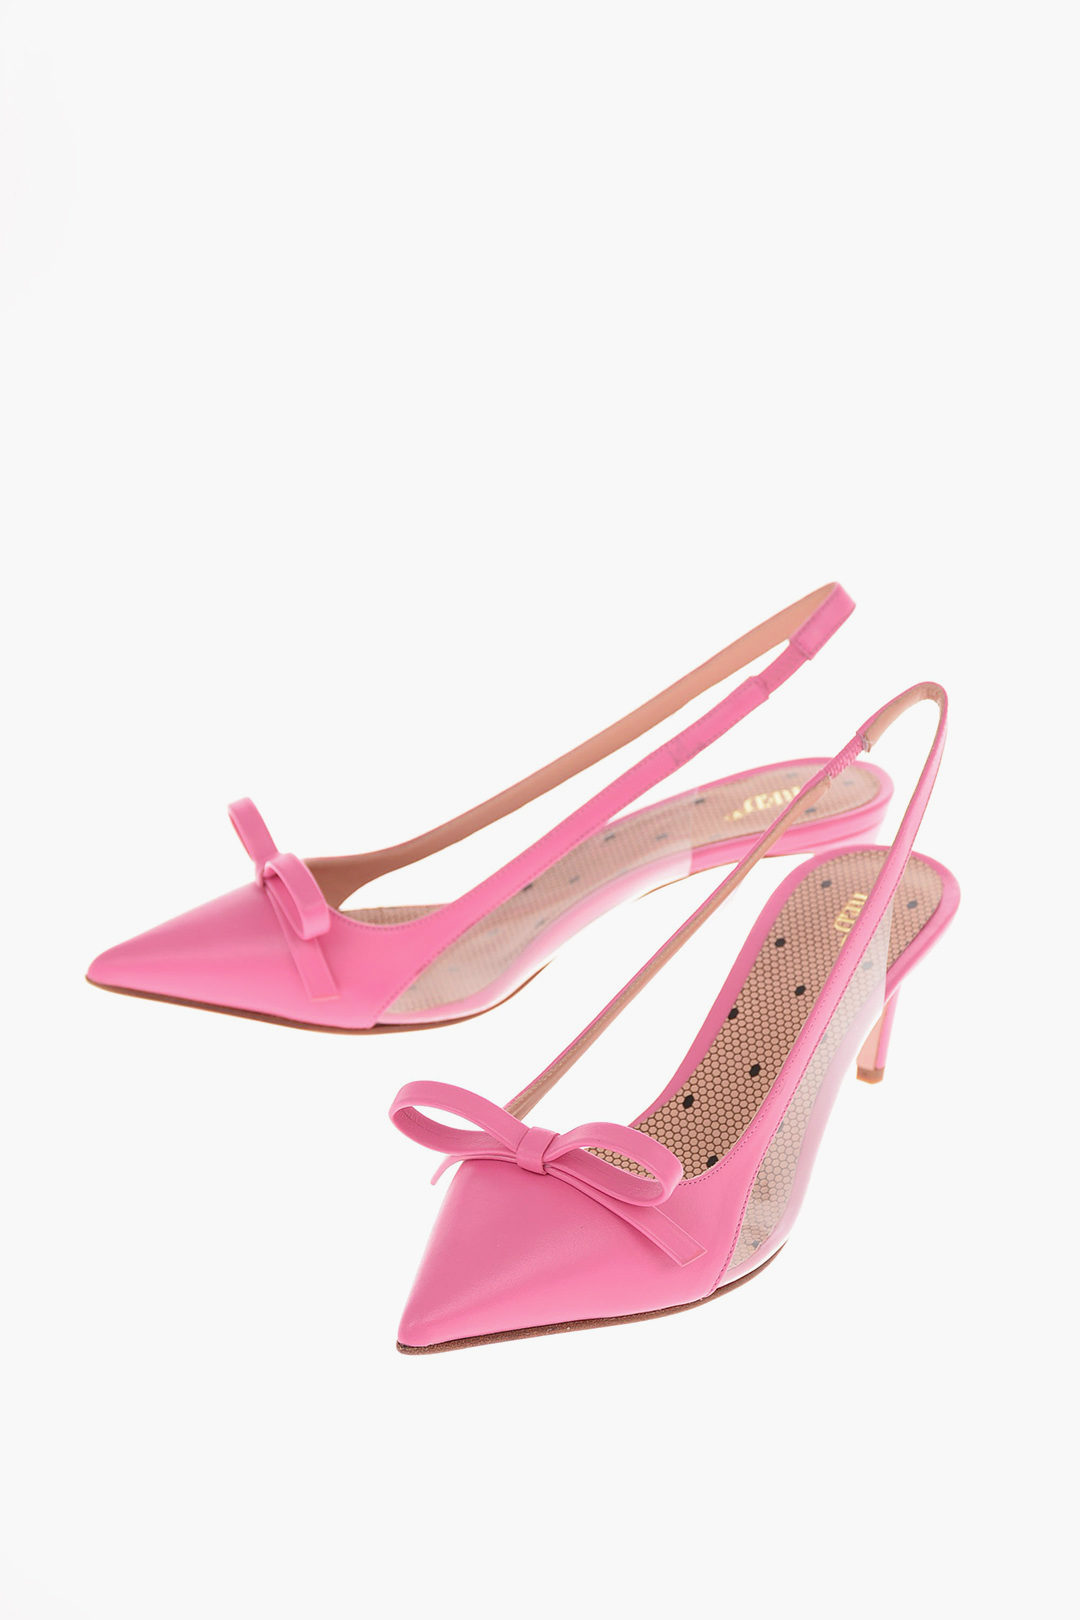 Red Valentino Shoes with Bow Detail